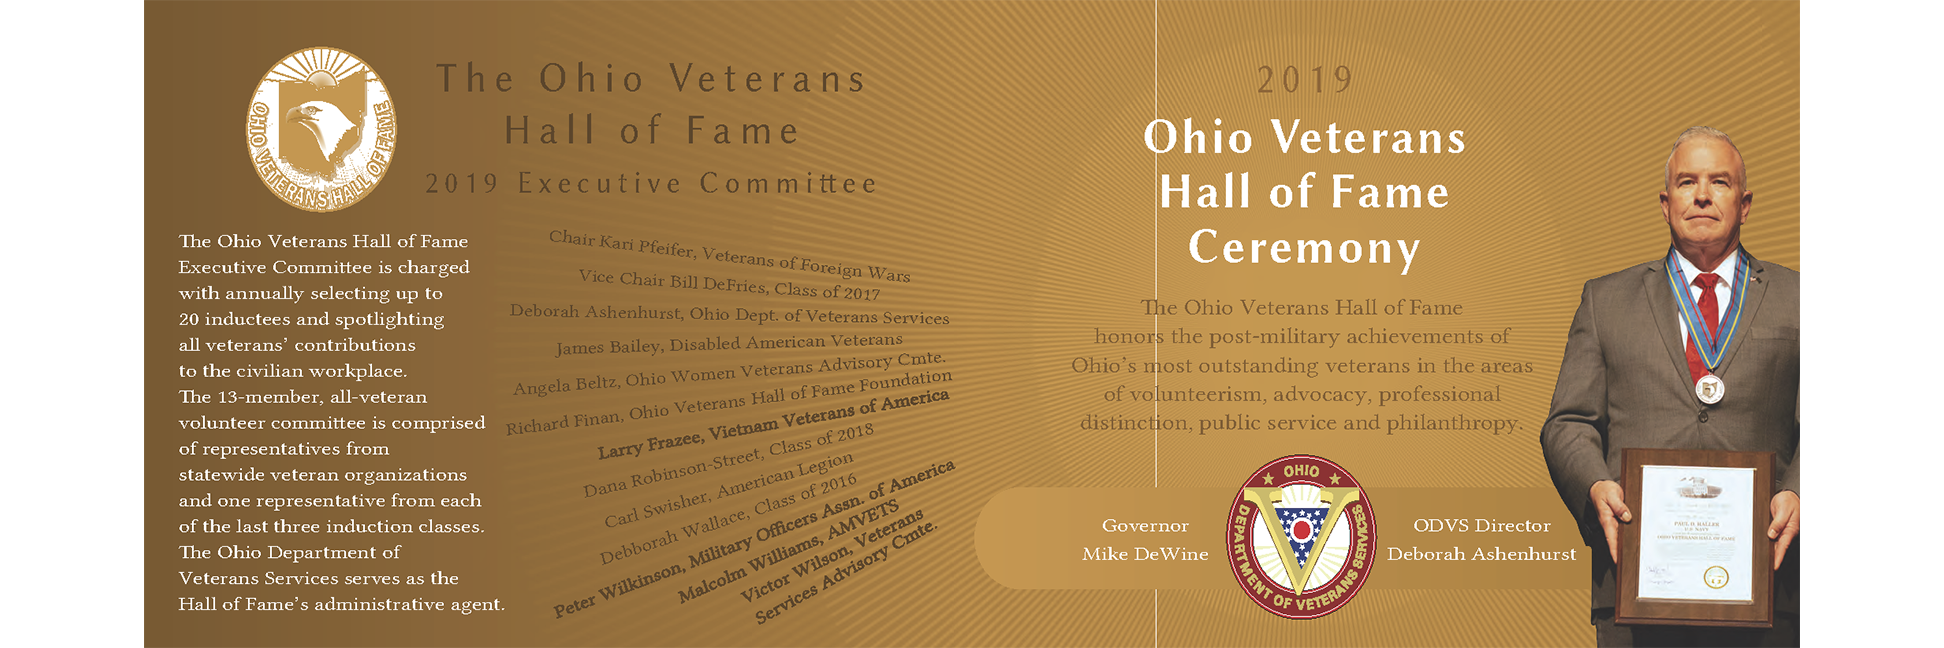 Ohio Veterans Hall of Fame Ceremony 2019.png